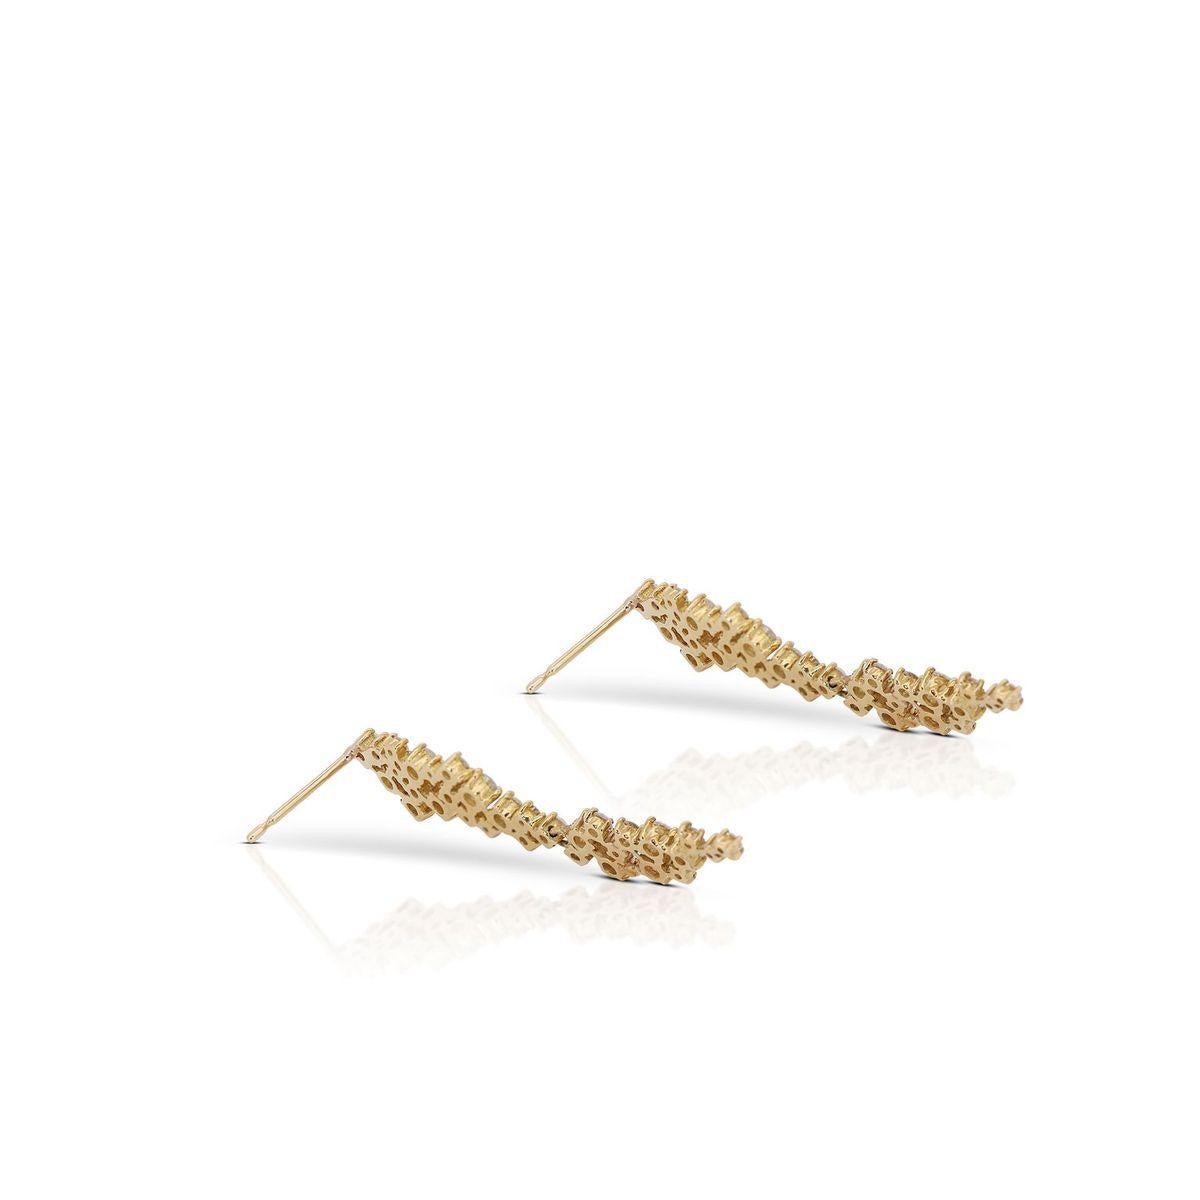 Elegant 18k Yellow Gold Drop Earrings with 1.60 Natural Round Diamonds, NGI Cert For Sale 3